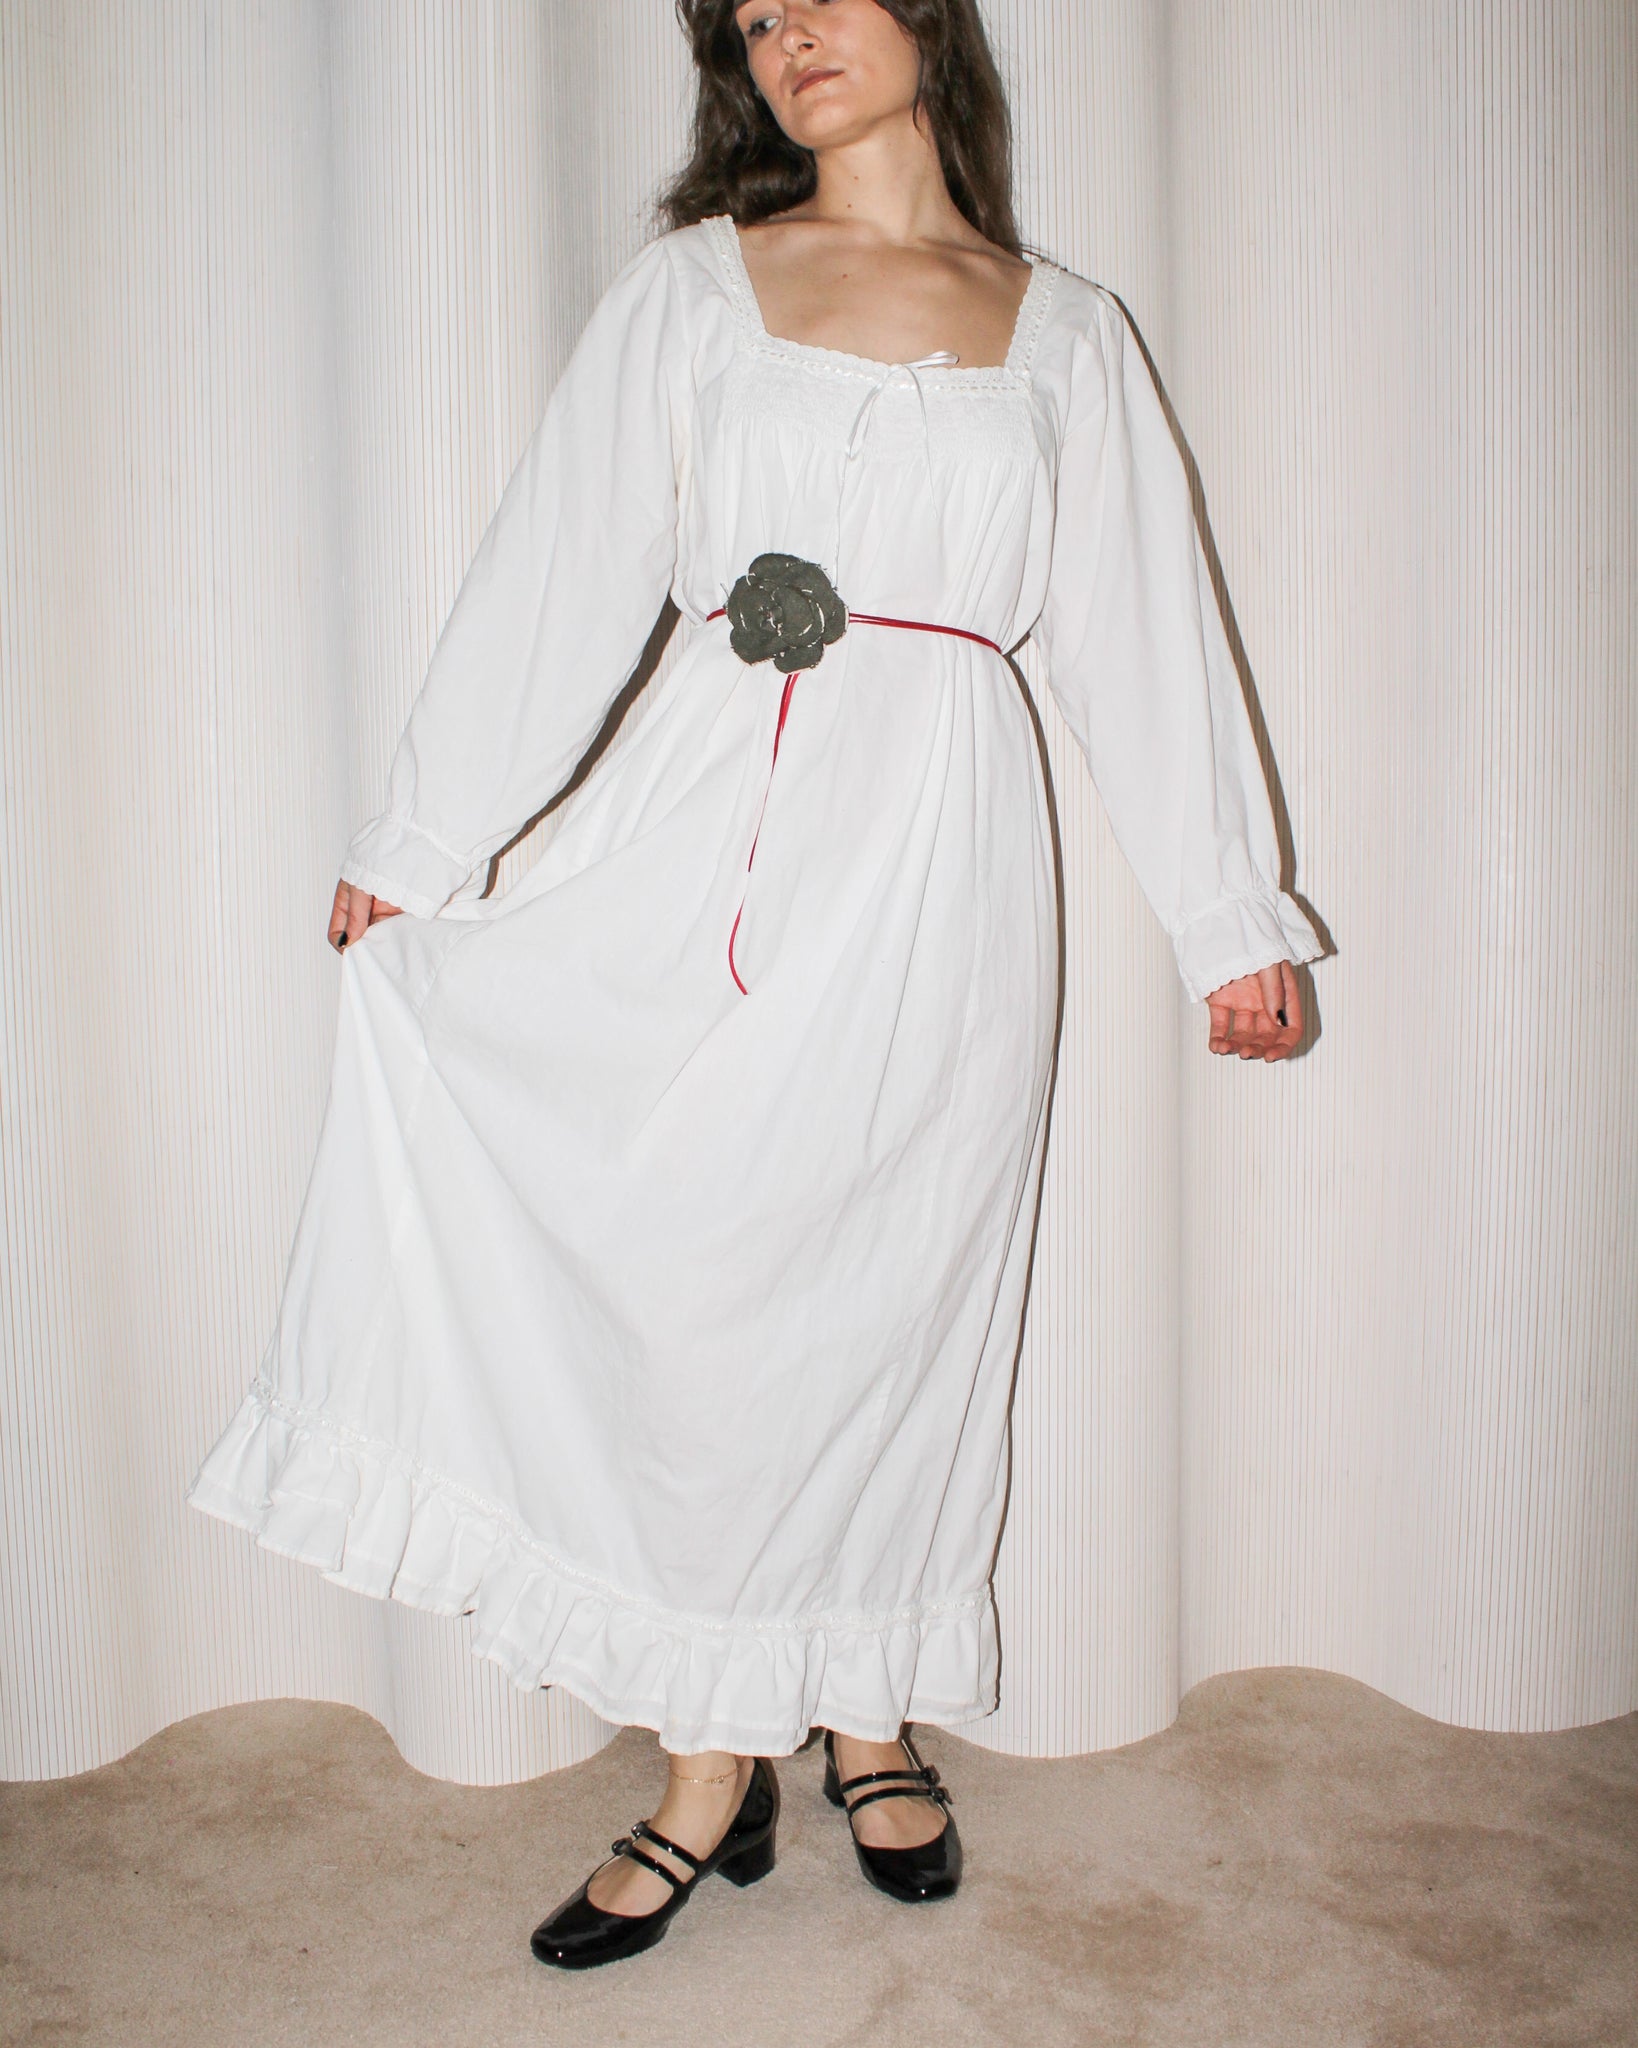 Long White Cotton Night Gown (Fits S-XL)